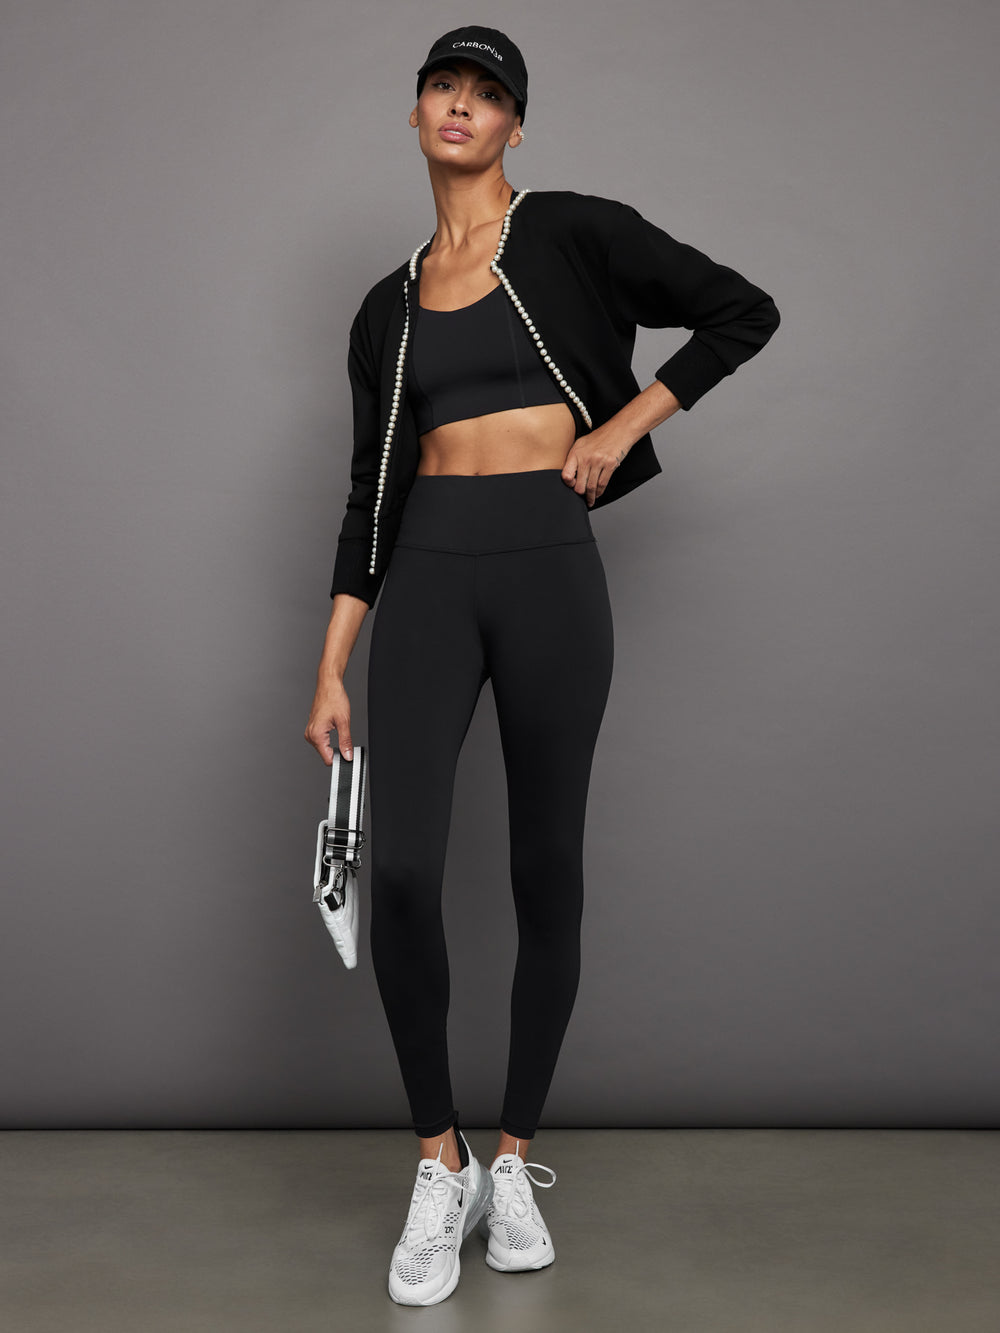 Upgrade Your Basic Black Leggings With Carbon38's New In-House Line